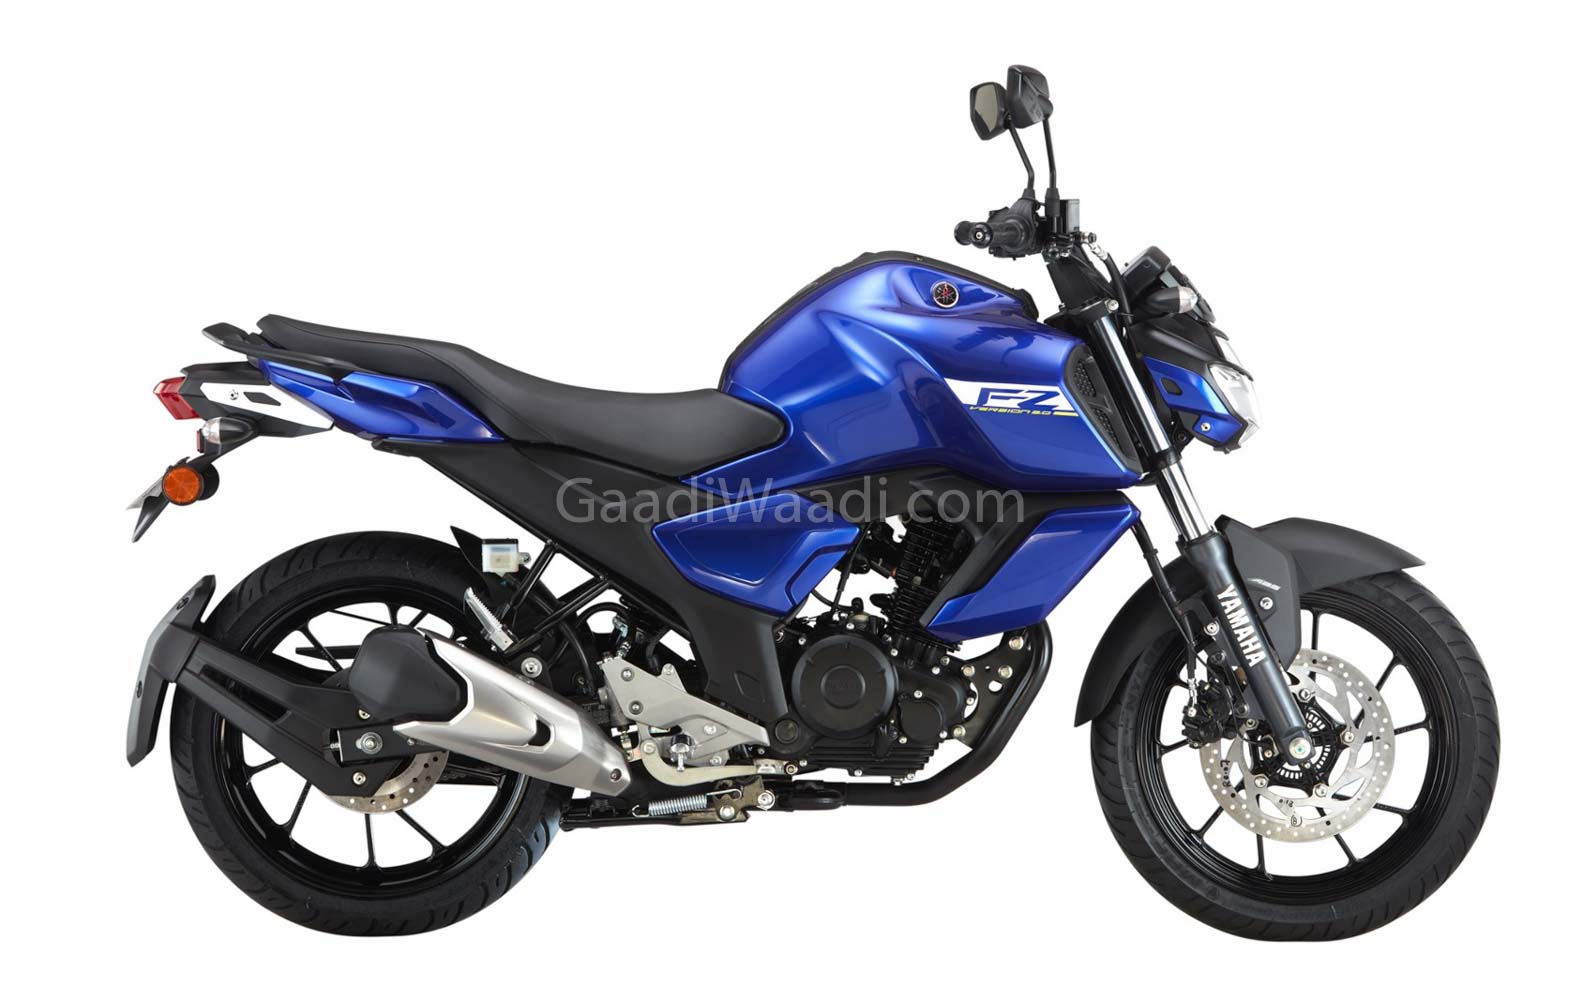 Yamaha FZ16 Sales Up By 18 Per Cent Thanks To New Version